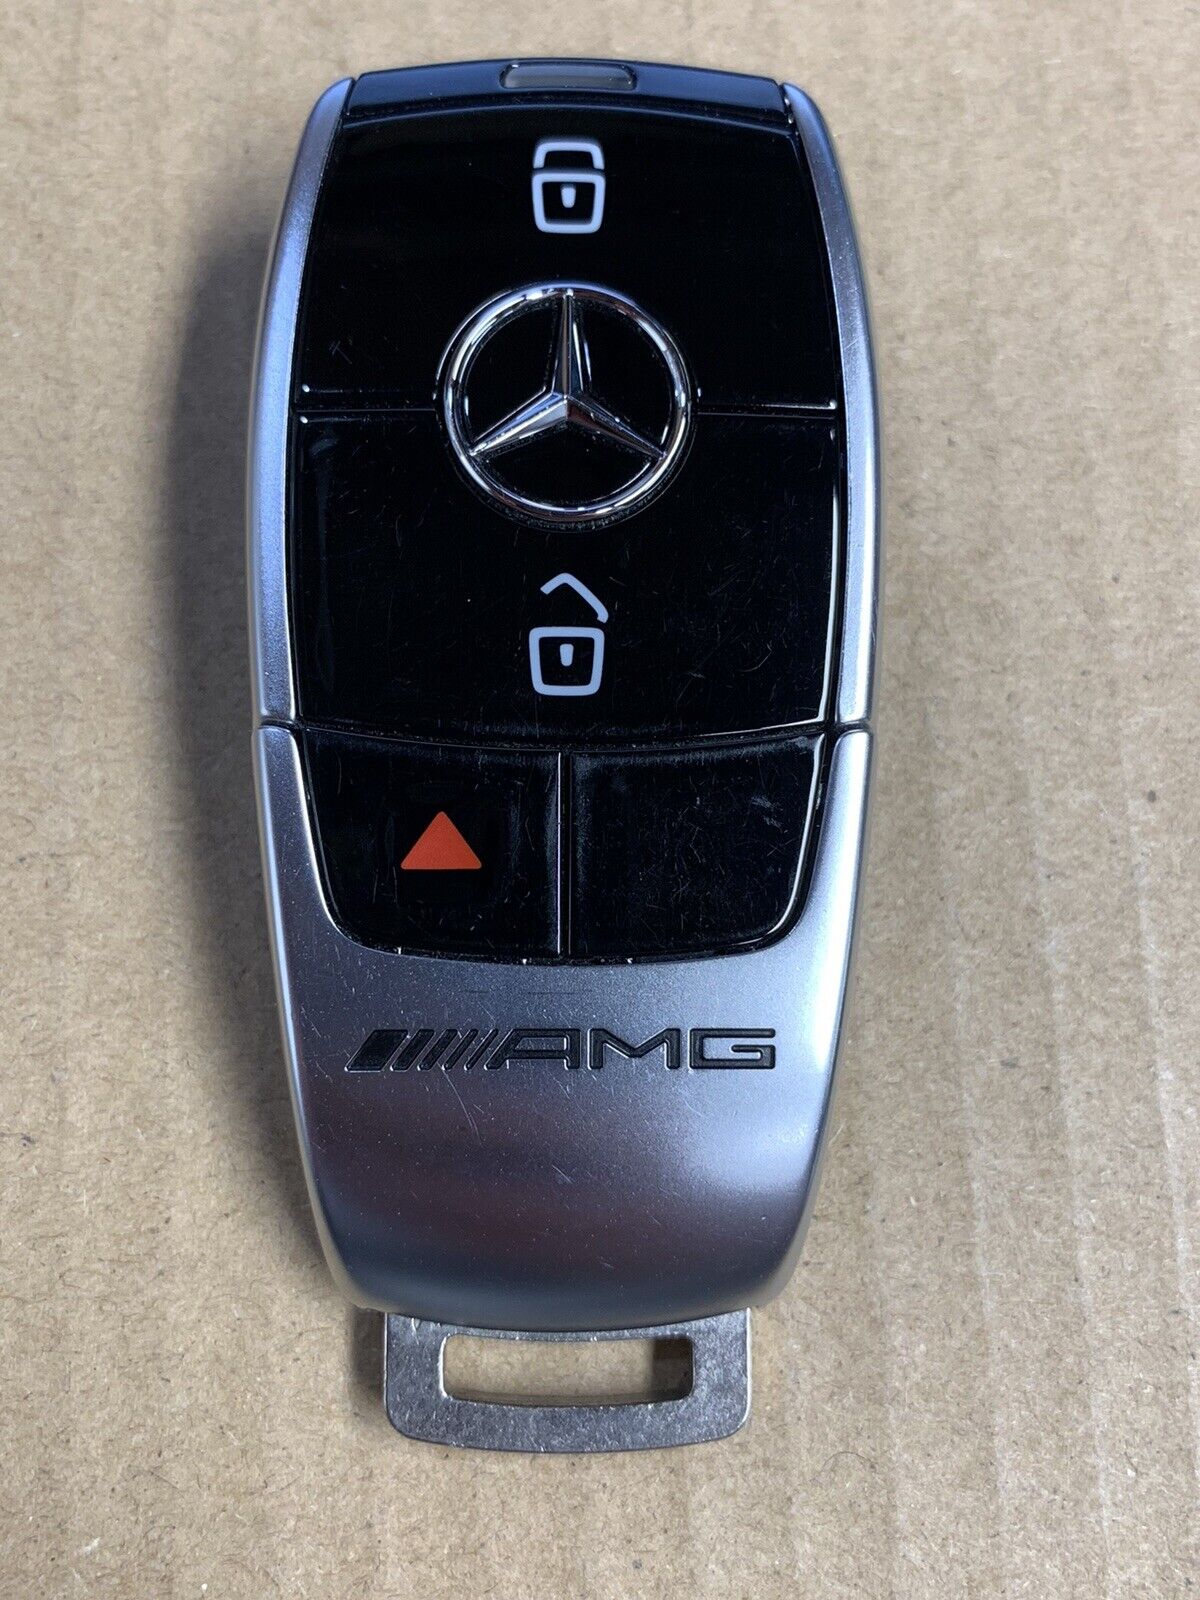 MERCEDES BENZ G63 AMG USED SMART KEY FOB 3 BUTTON OEM IYZ-MS2 TESTED